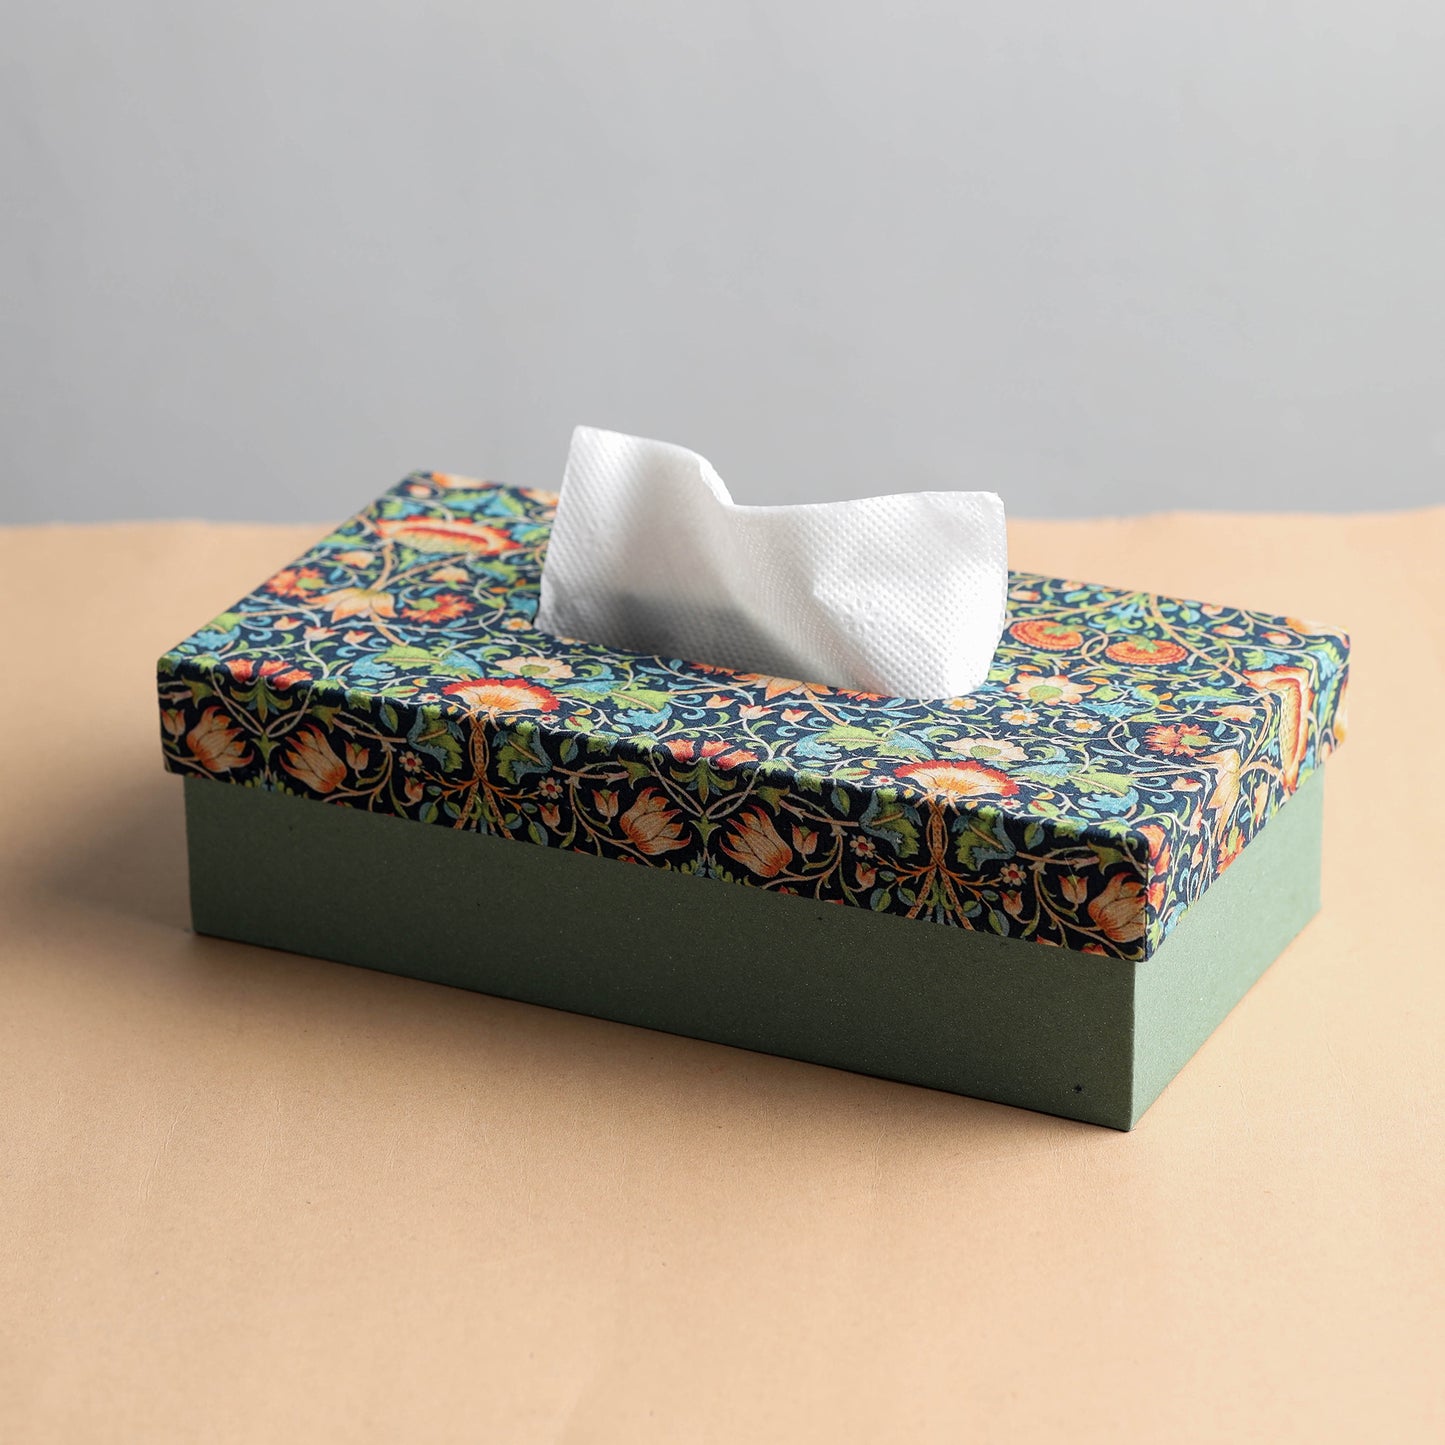 Floral Printed Handcrafted Tissue Box (10 x 5 in)